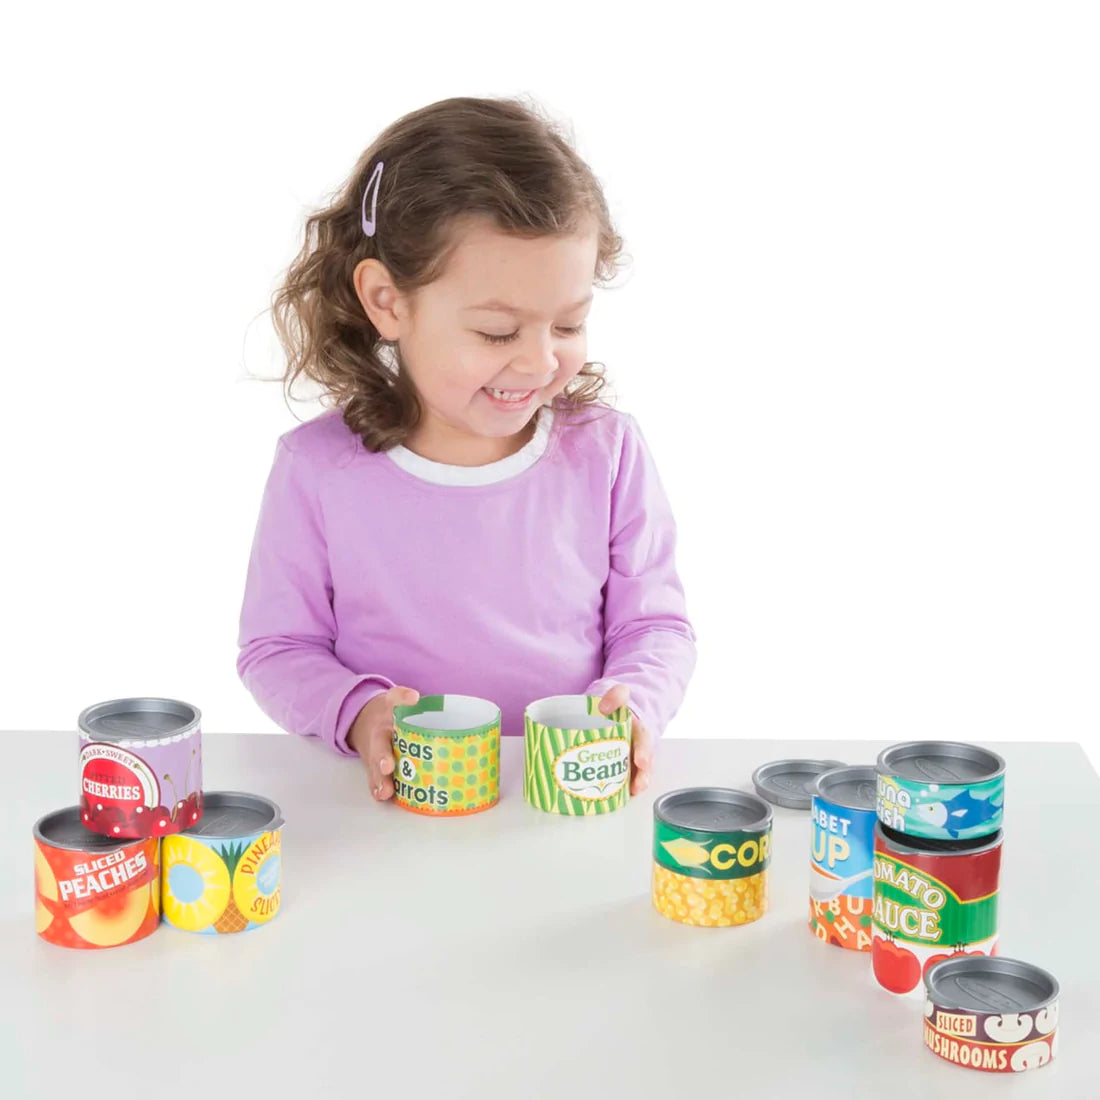 Let's Play House! Baking Play Set